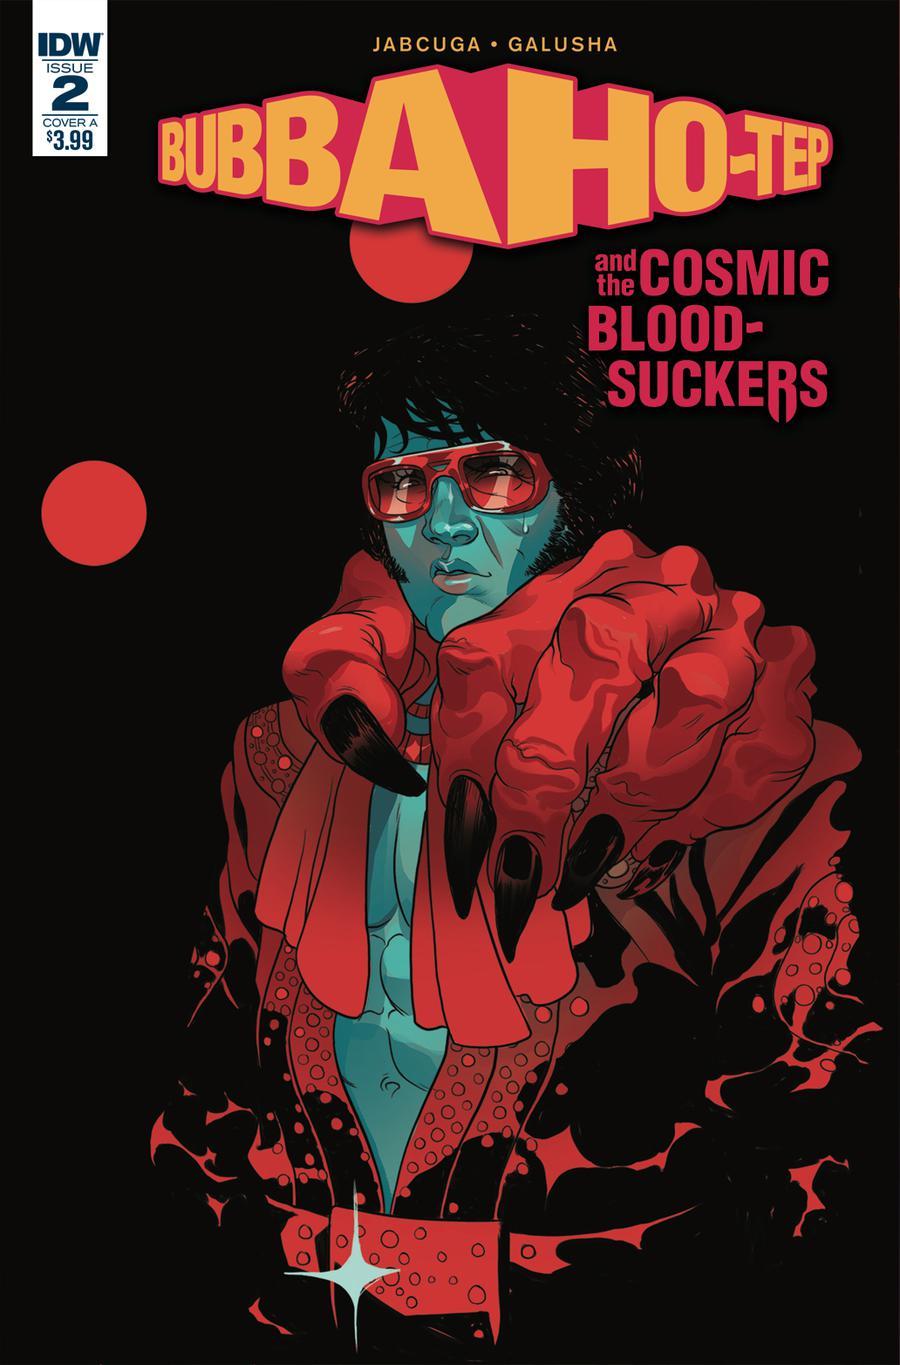 Bubba Ho-Tep And The Cosmic Blood-Suckers Vol. 1 #2